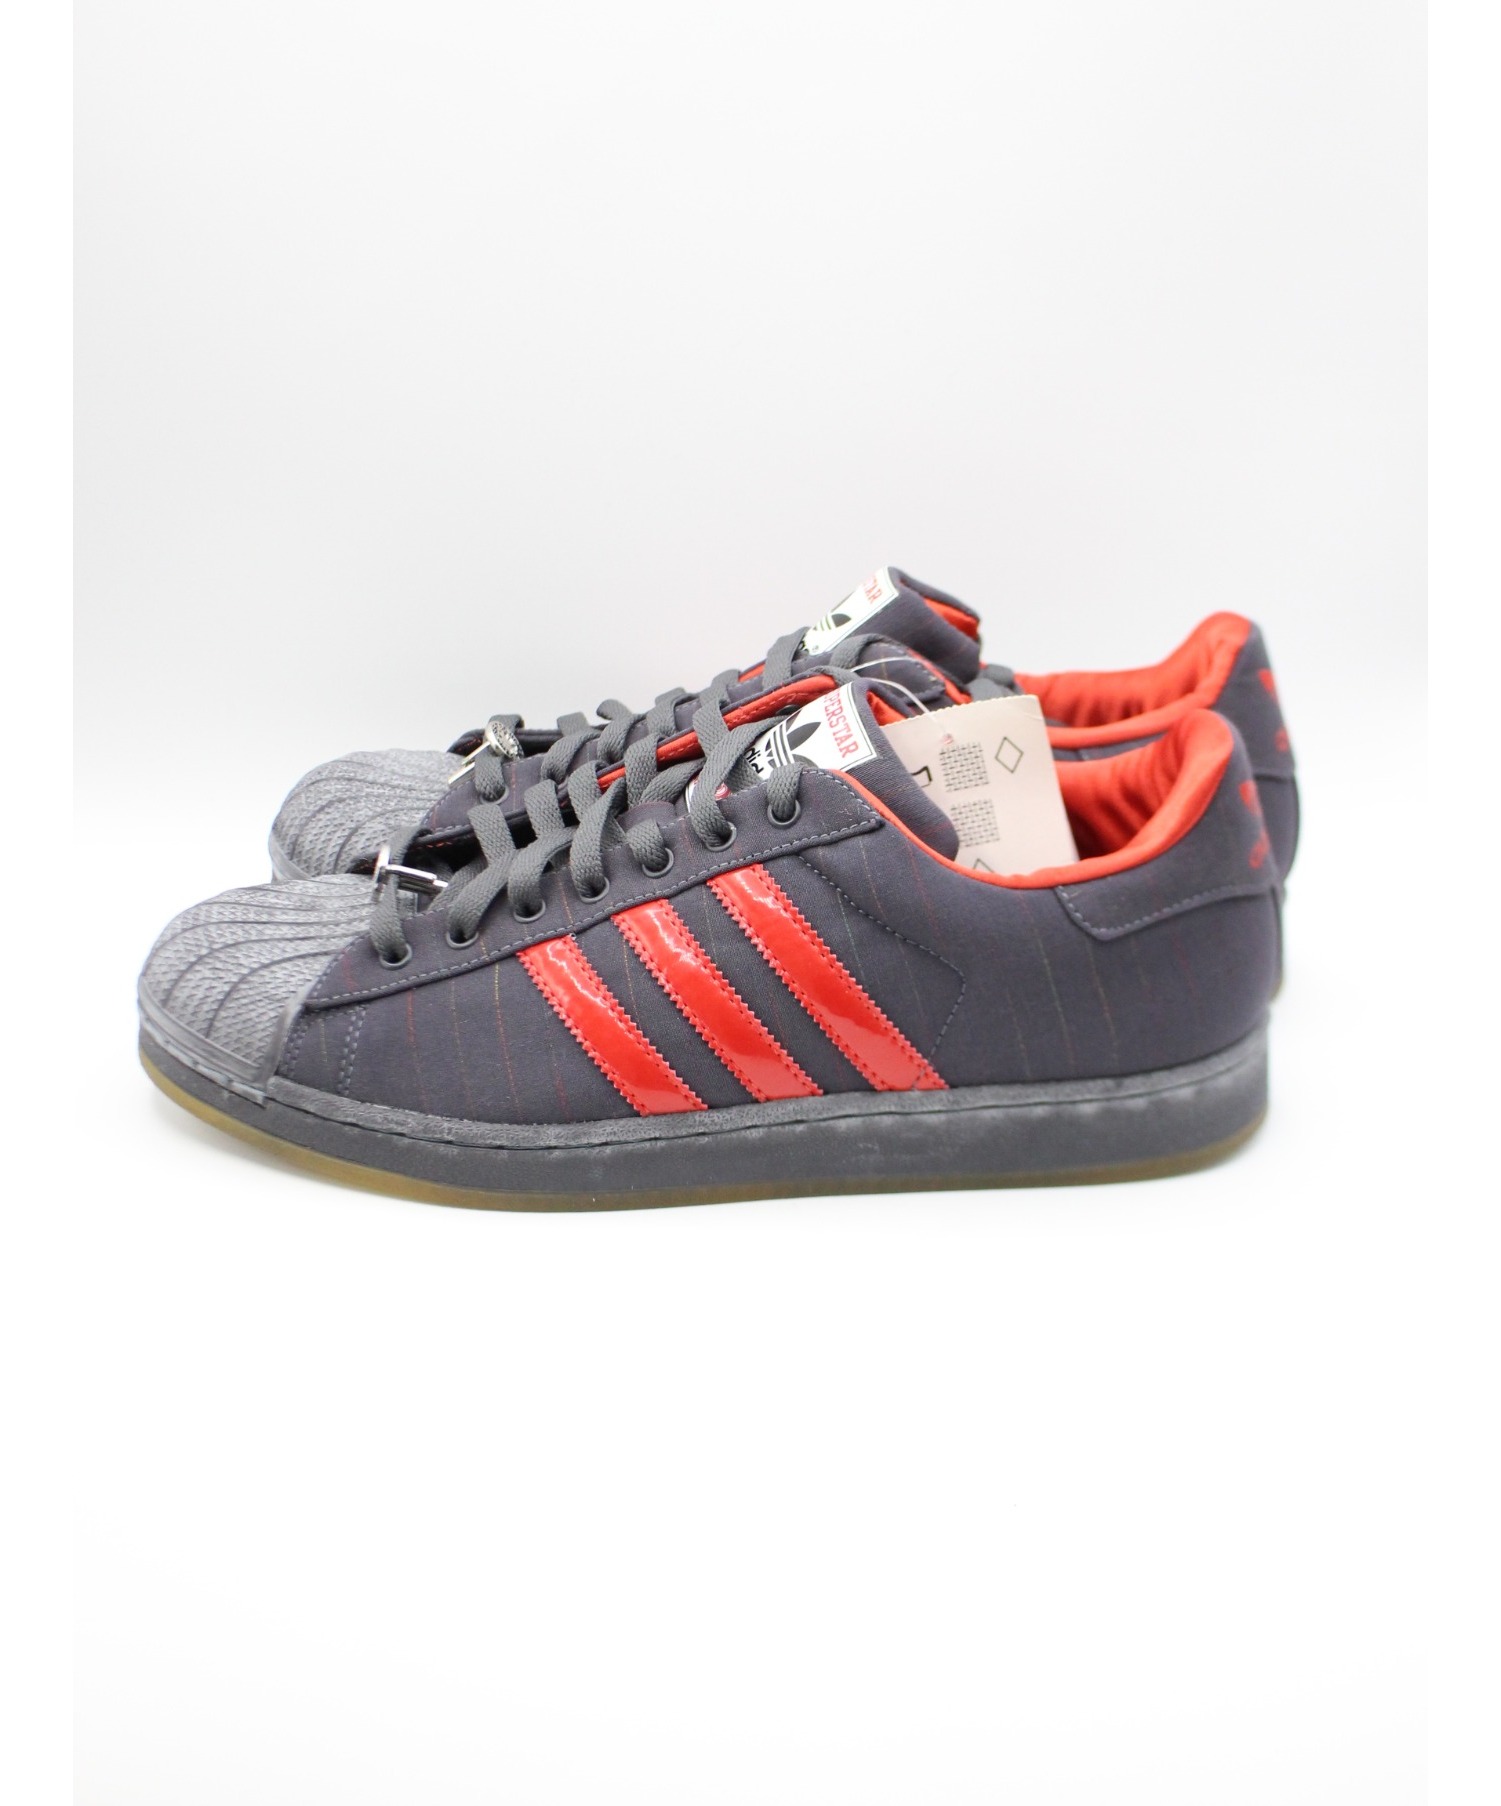 adidas red hot chili peppers shoes